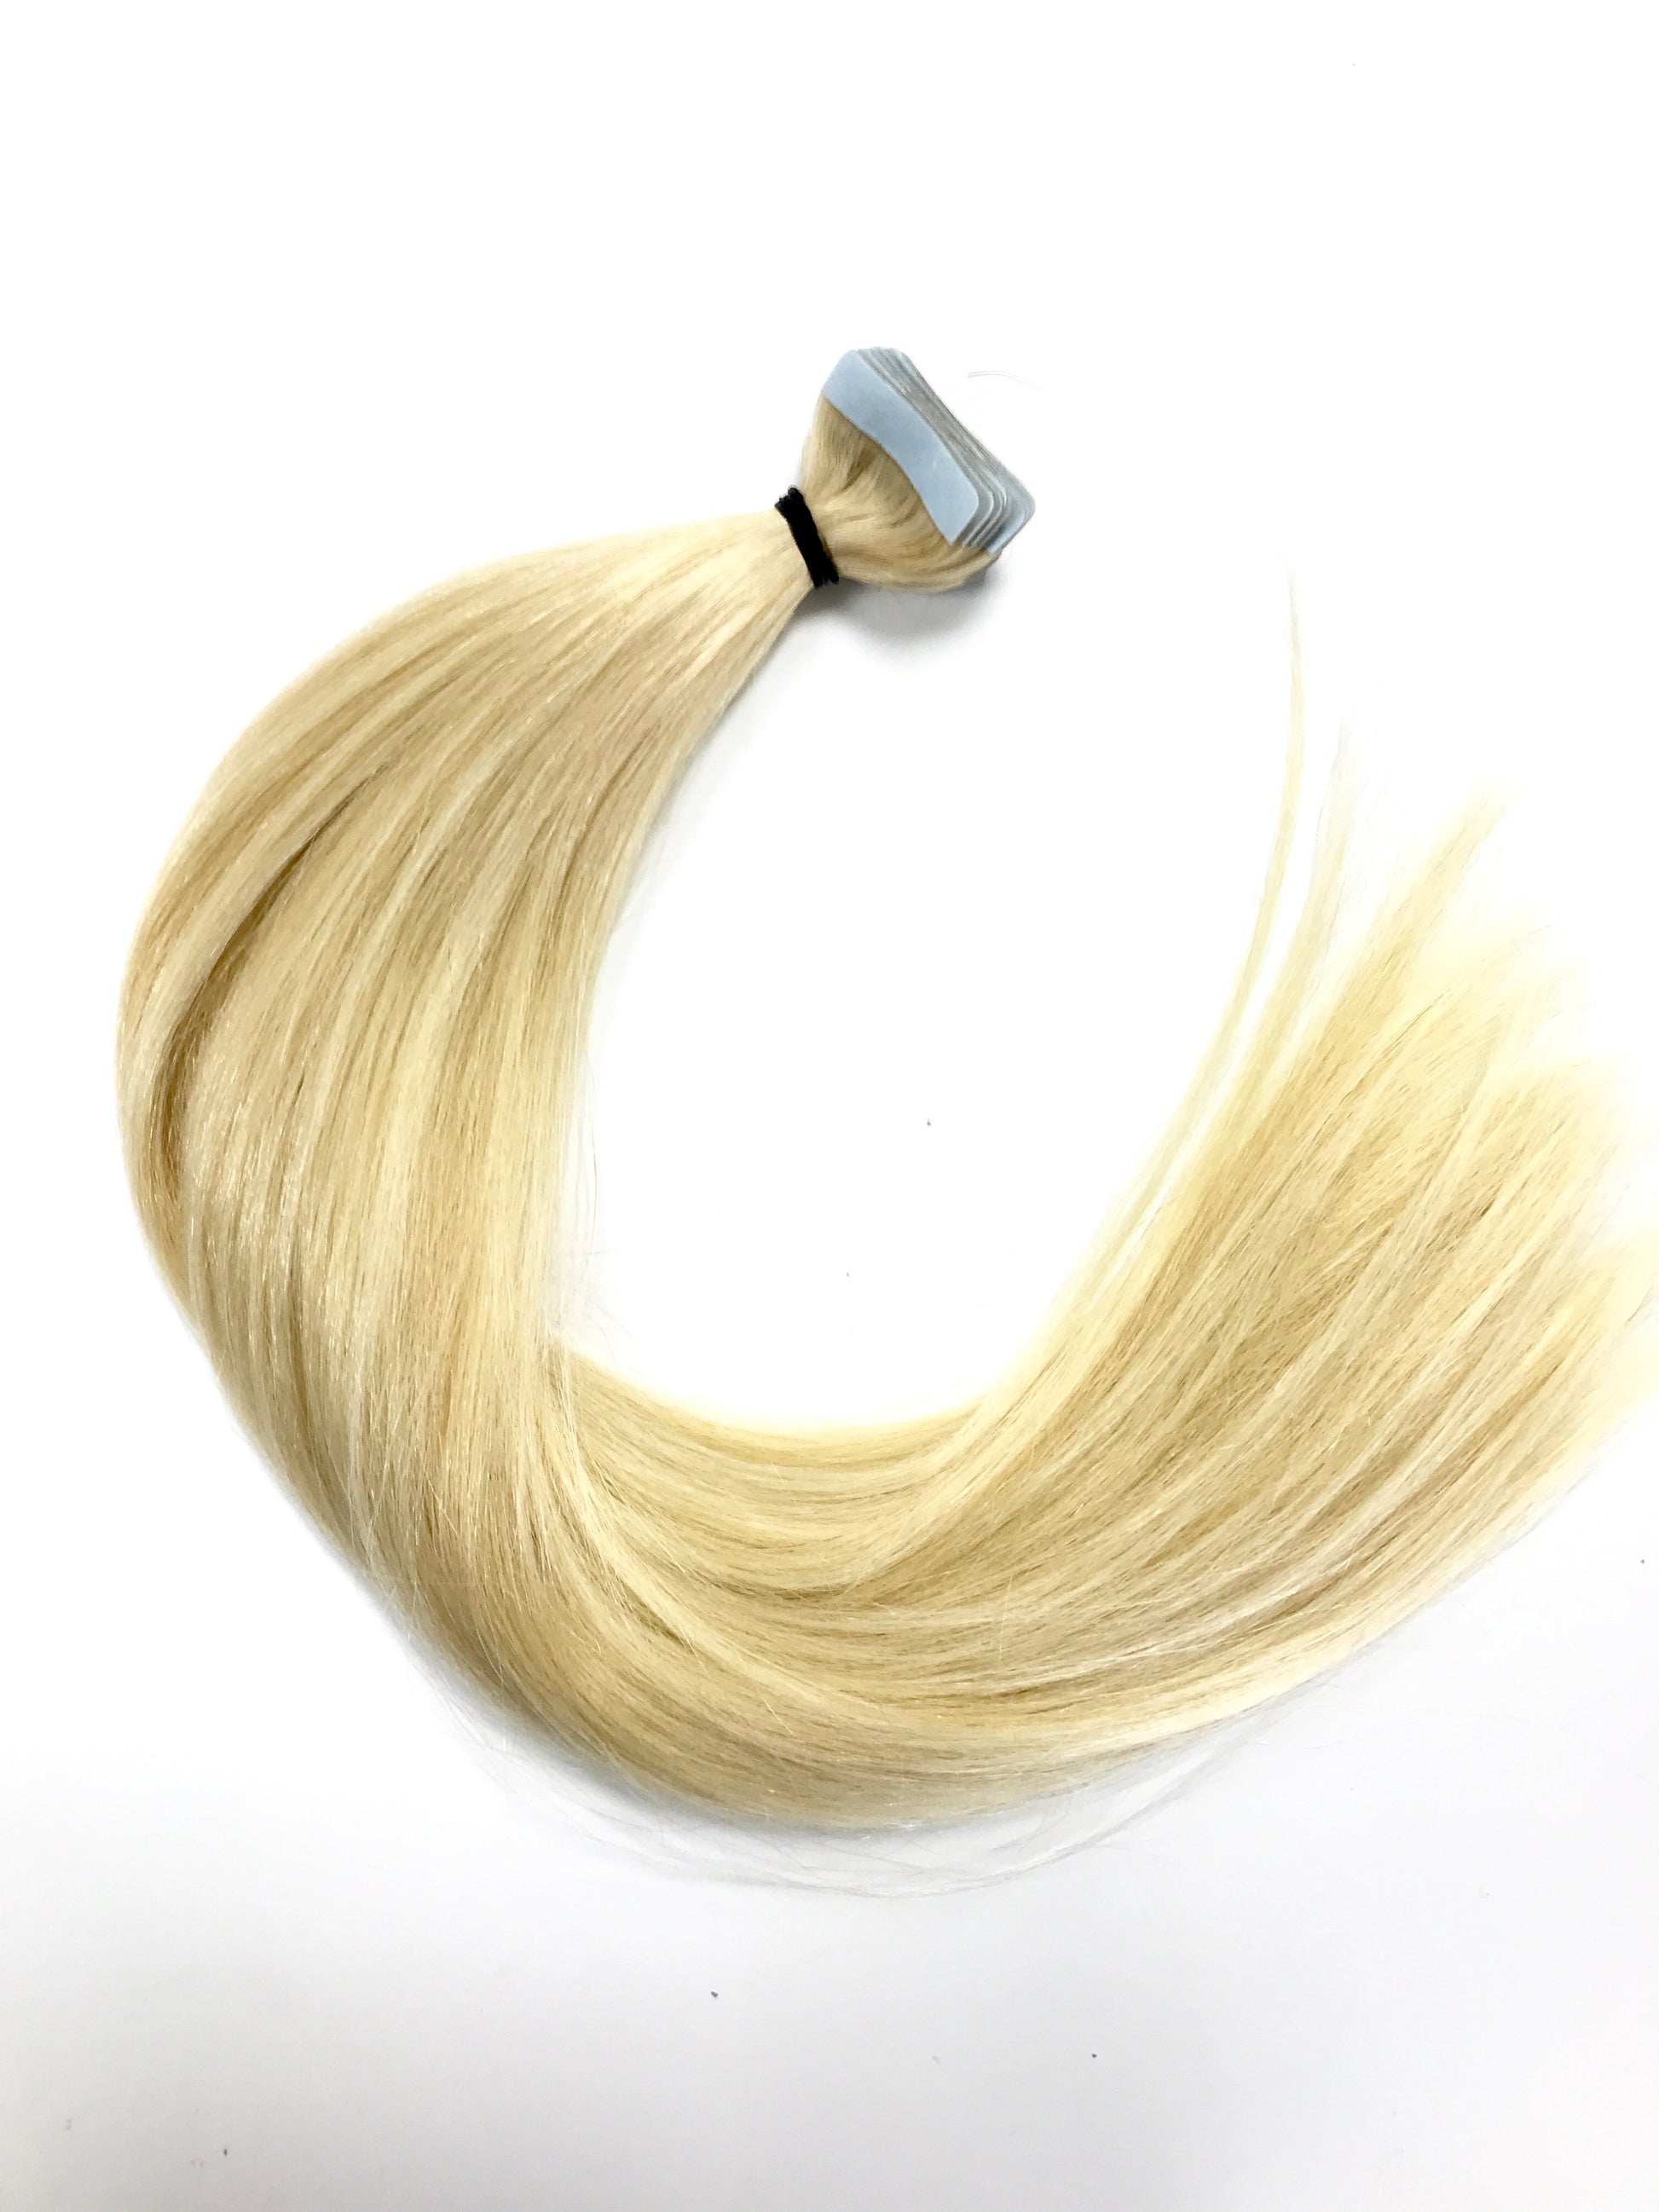 Russian Virgin Remy Human Hair, Tape Extensions, Straight, 18'', Blonde. Quick Shipping!-Virgin Hair & Beauty, The Best Hair Extensions, Real Virgin Human Hair.